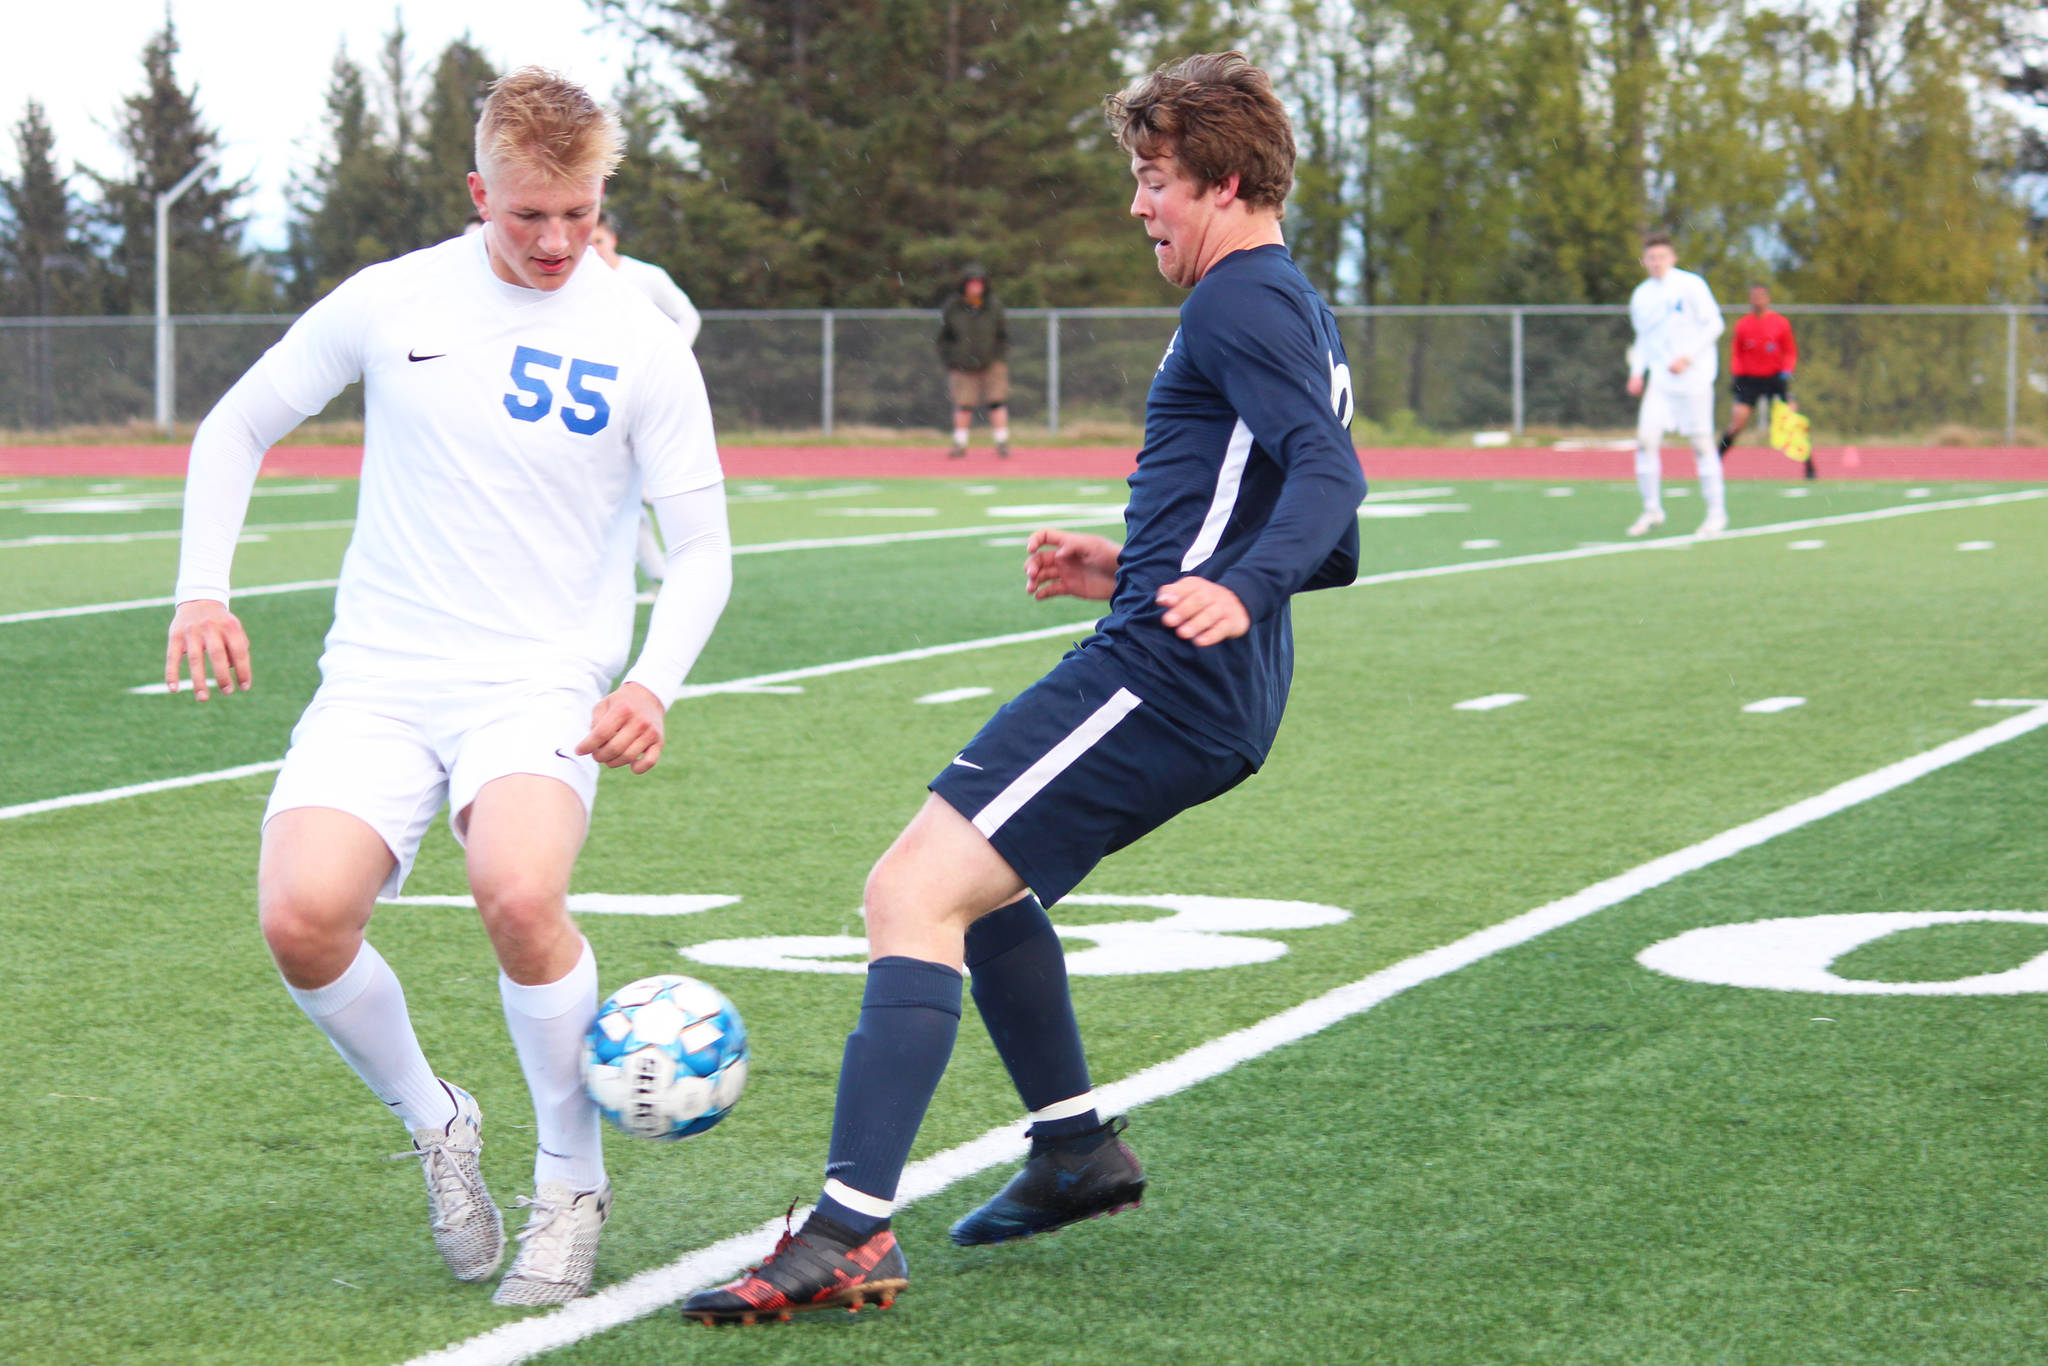 Homer’s Phinny Weston (right) battles for the ball with Soldotna’s Hudson Metcalf during the semi-final game of the Peninsula Conference Soccer Tournament on Friday, May 17, 2019 at Homer High School in Homer, Alaska. (Photo by Megan Pacer/Homer News)